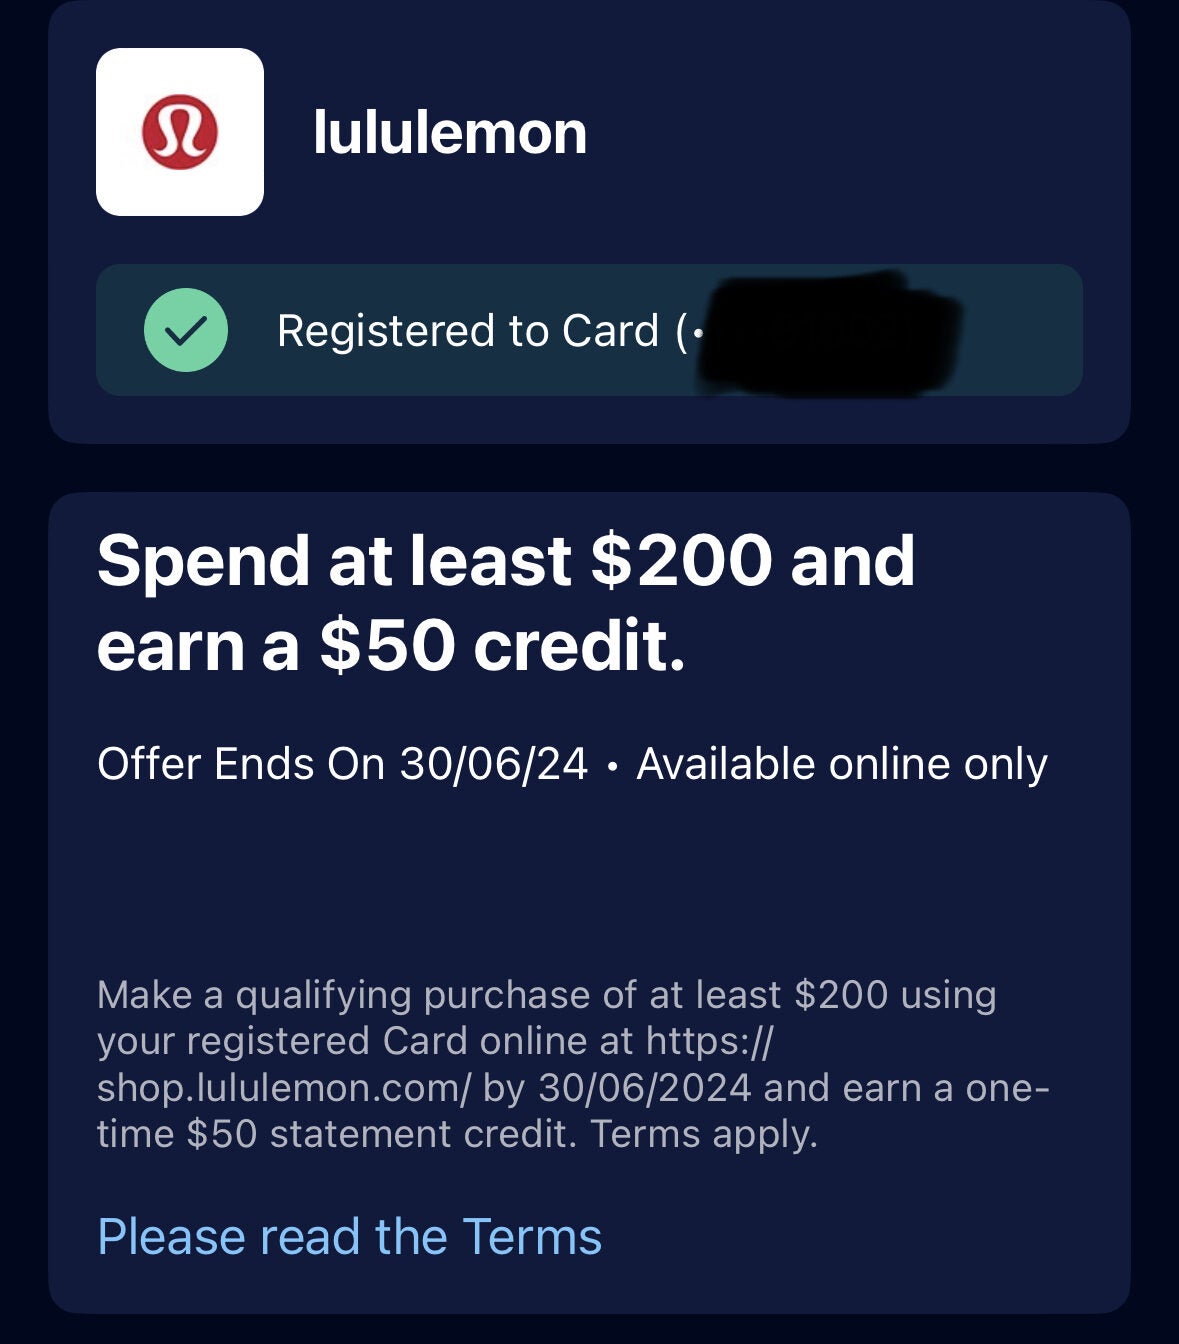 American Express] Lululemon - Spend at least $200 and earn a $50 credit -  RedFlagDeals.com Forums